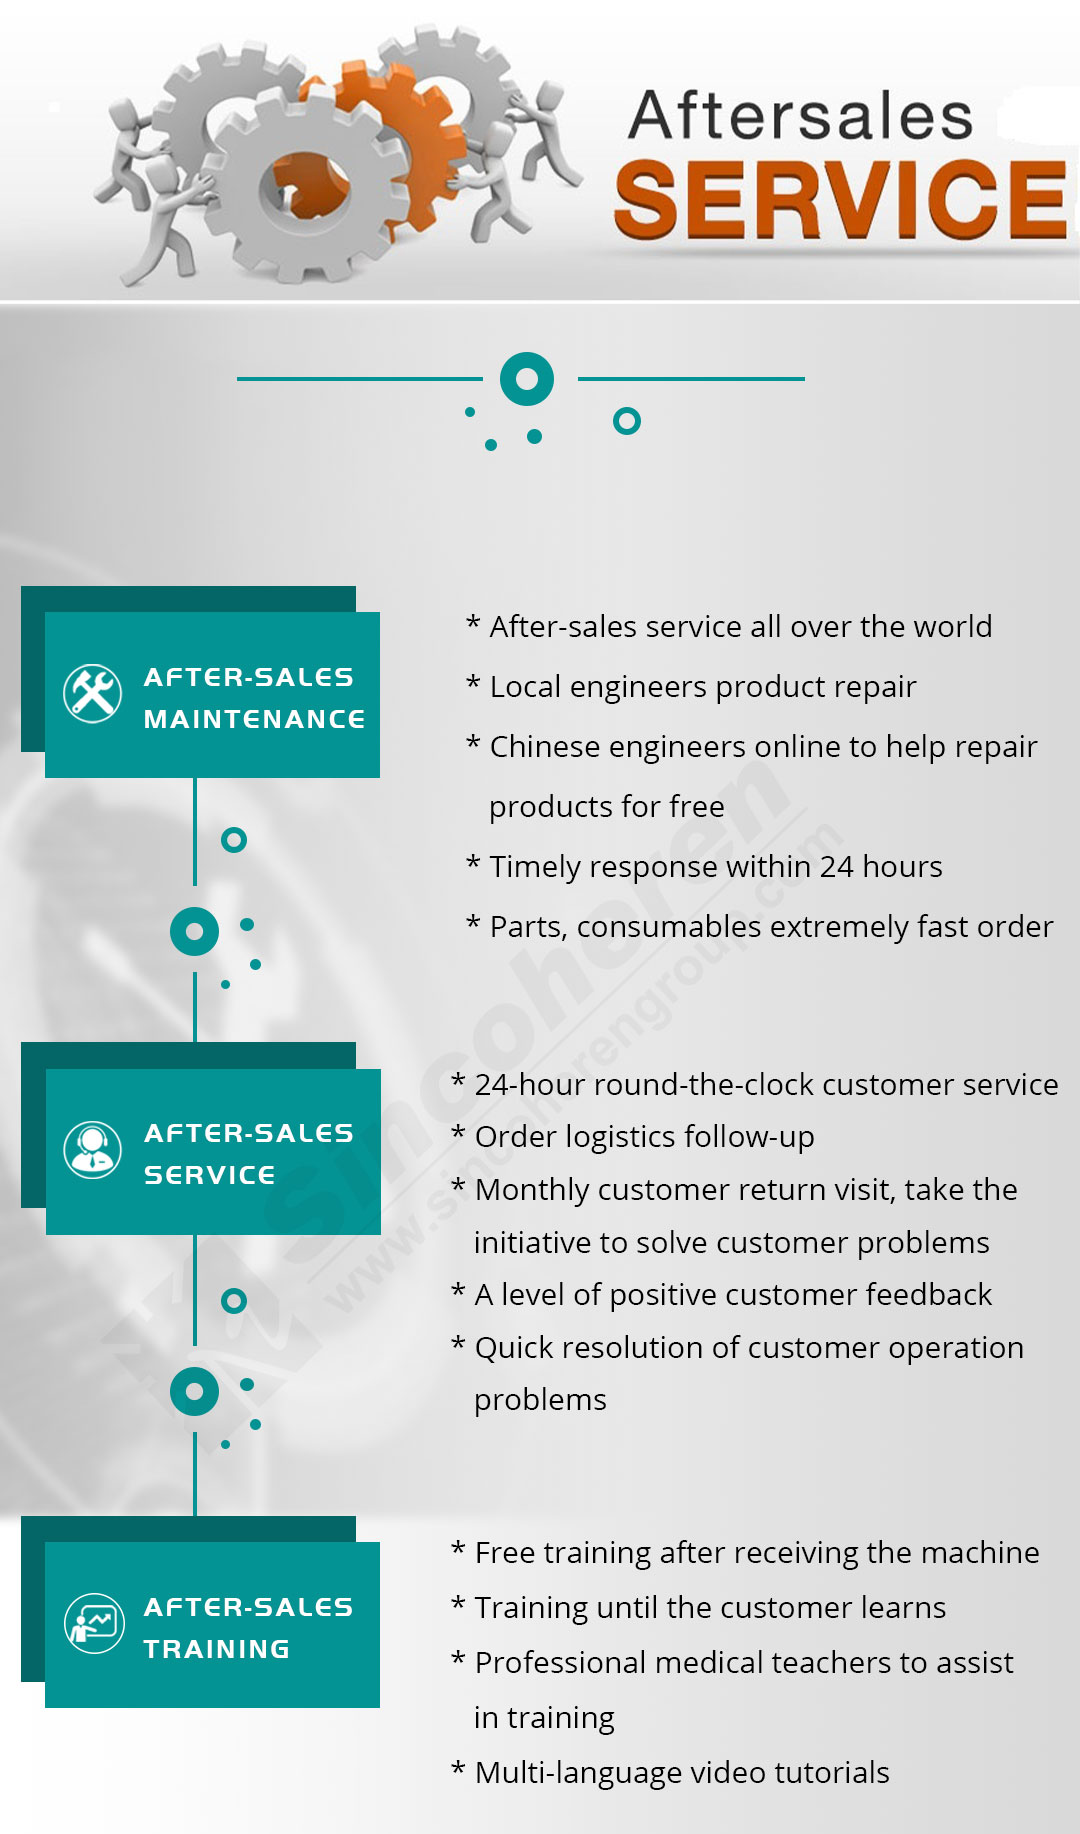 atersales service